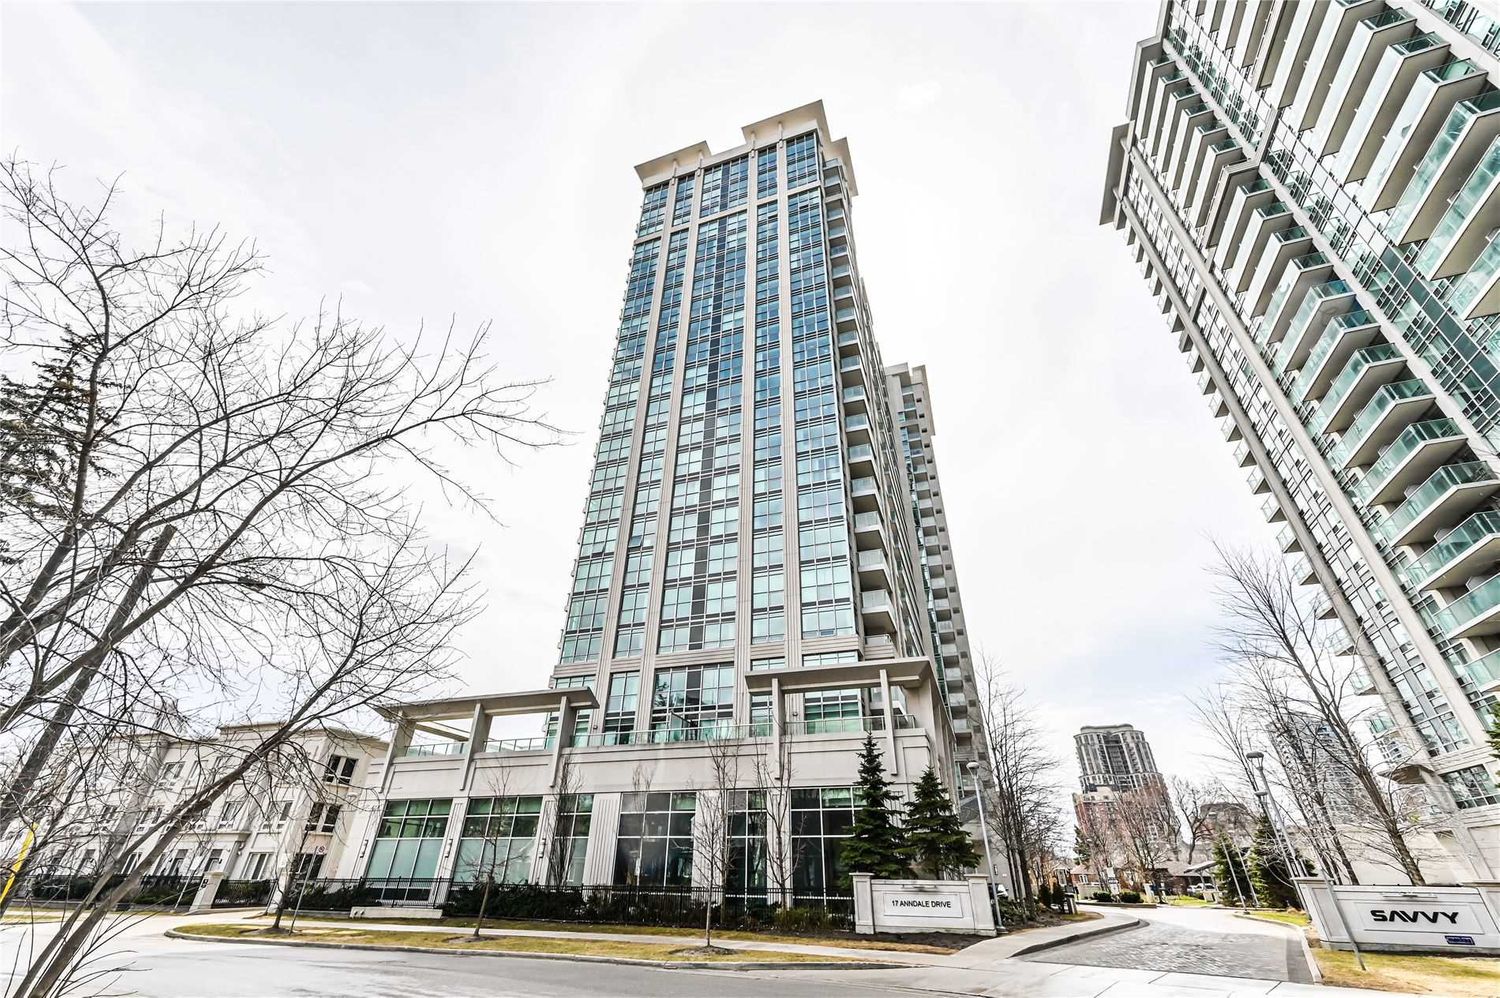 17 Anndale Drive. Savvy Condos is located in  North York, Toronto - image #3 of 3